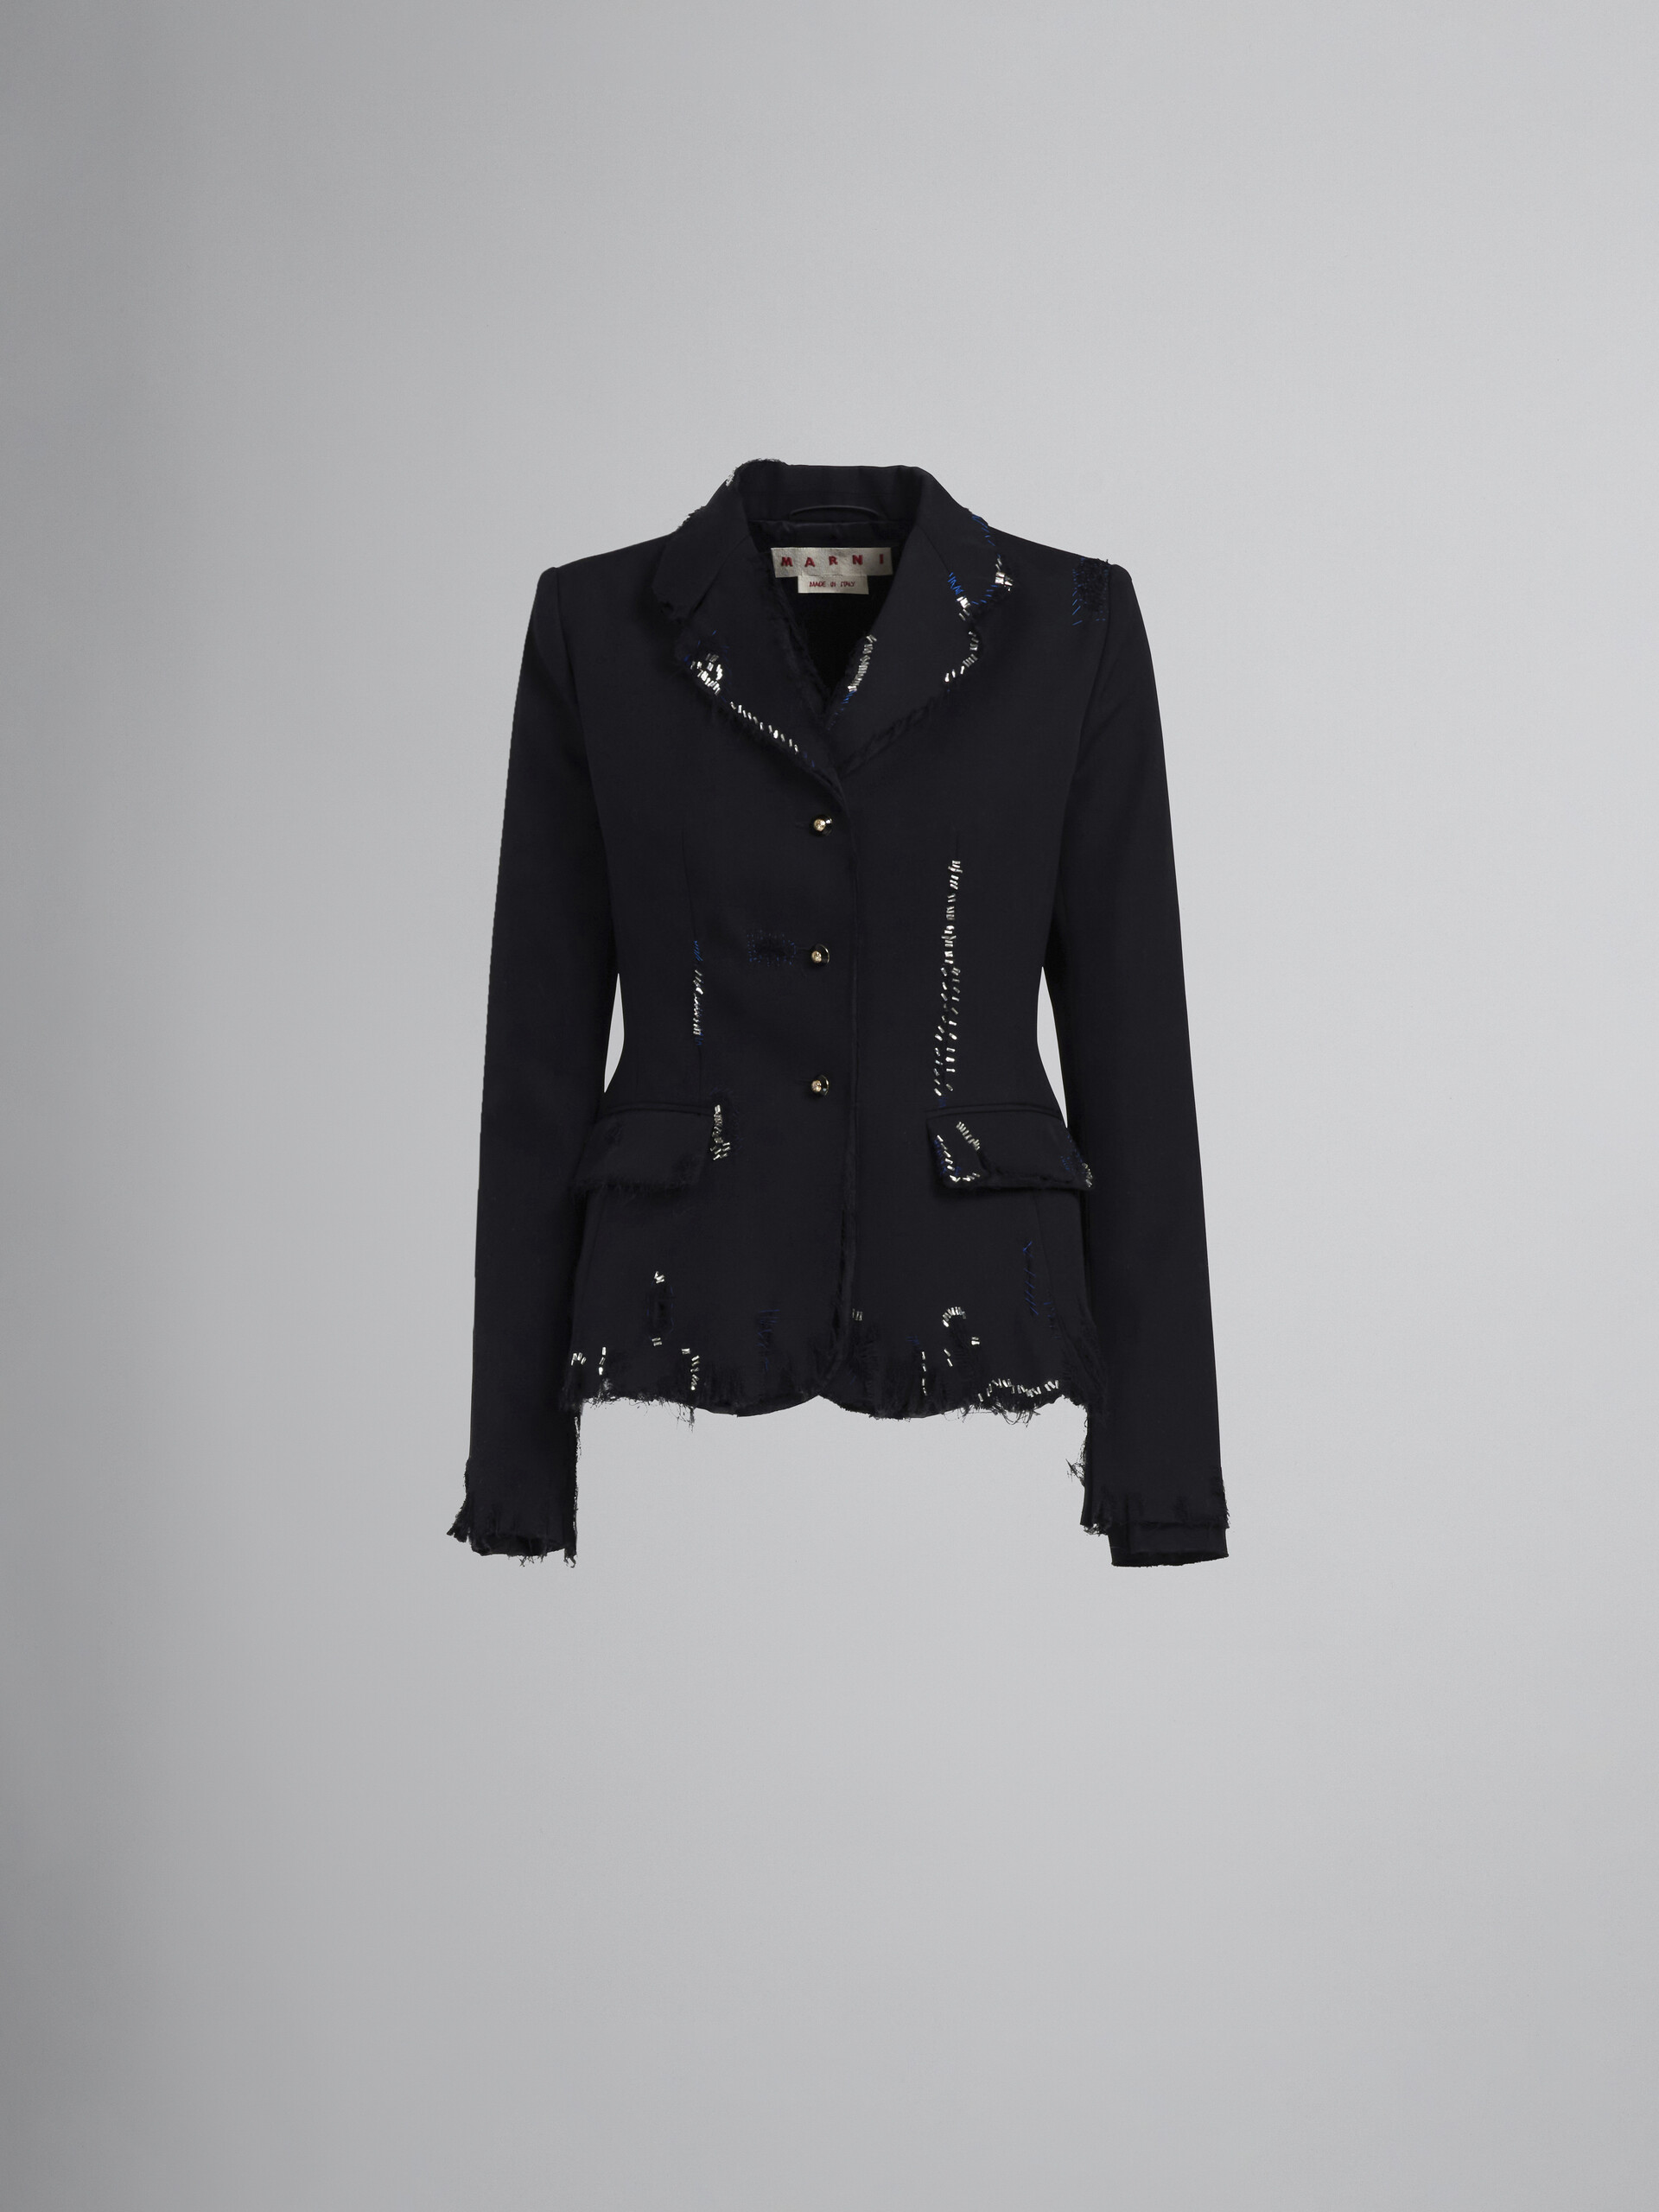 Black fitted wool blazer with embroidery - Jackets - Image 1